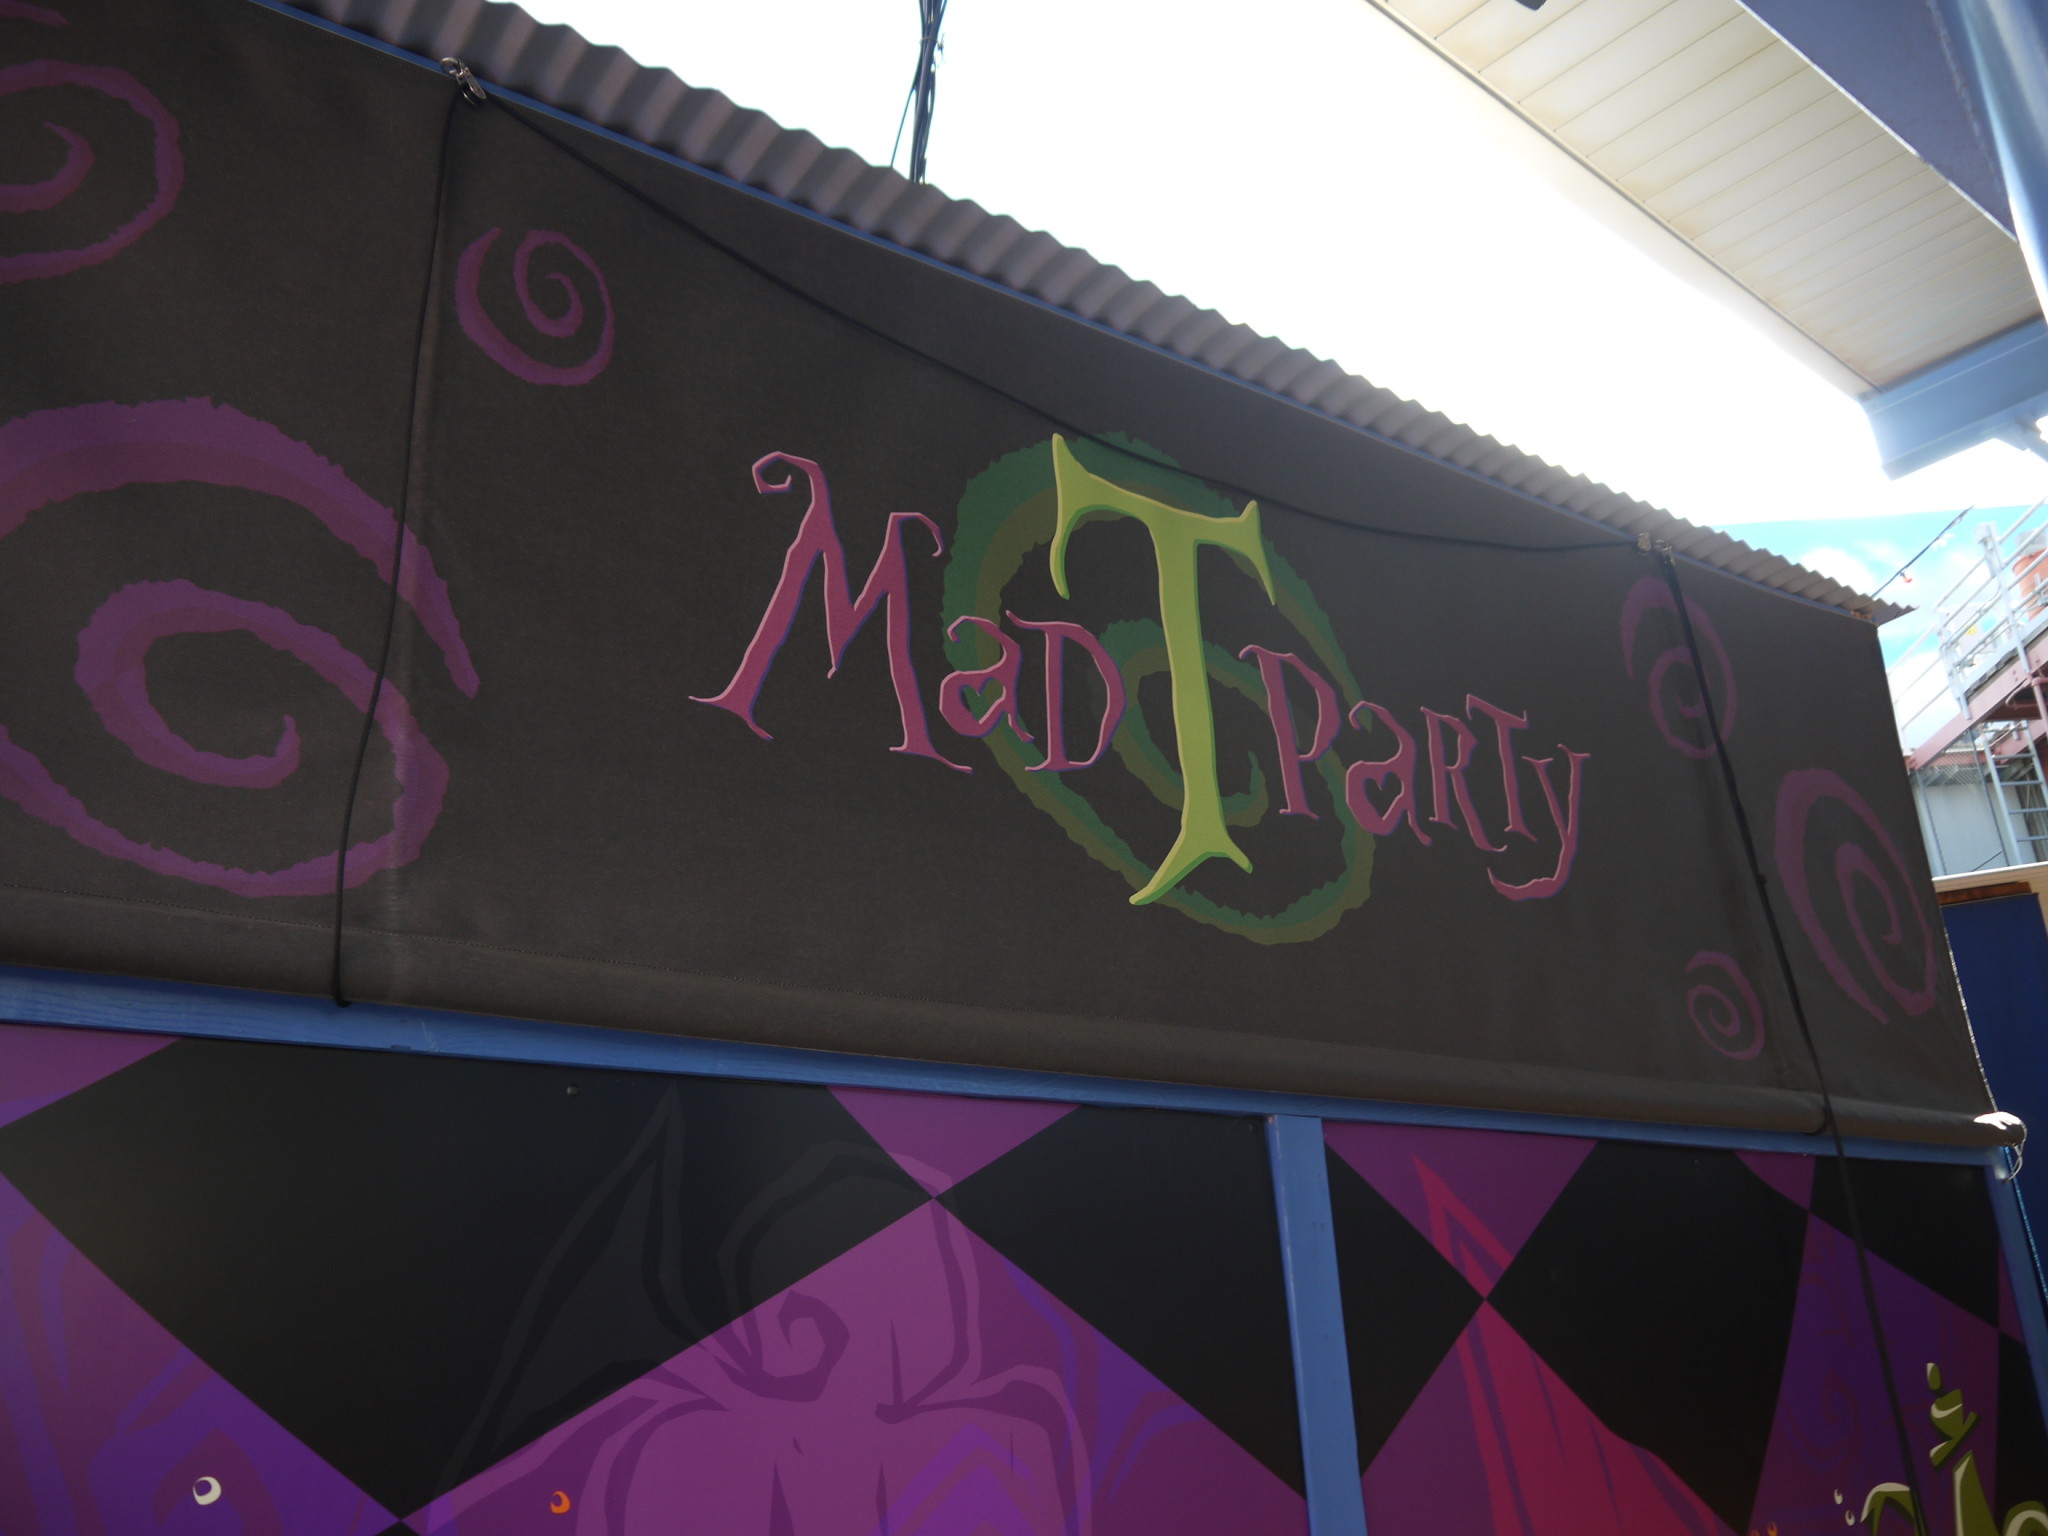 Mad T Party adds a Dash of Halloween to the Mix in Disney’s California Adventure Park